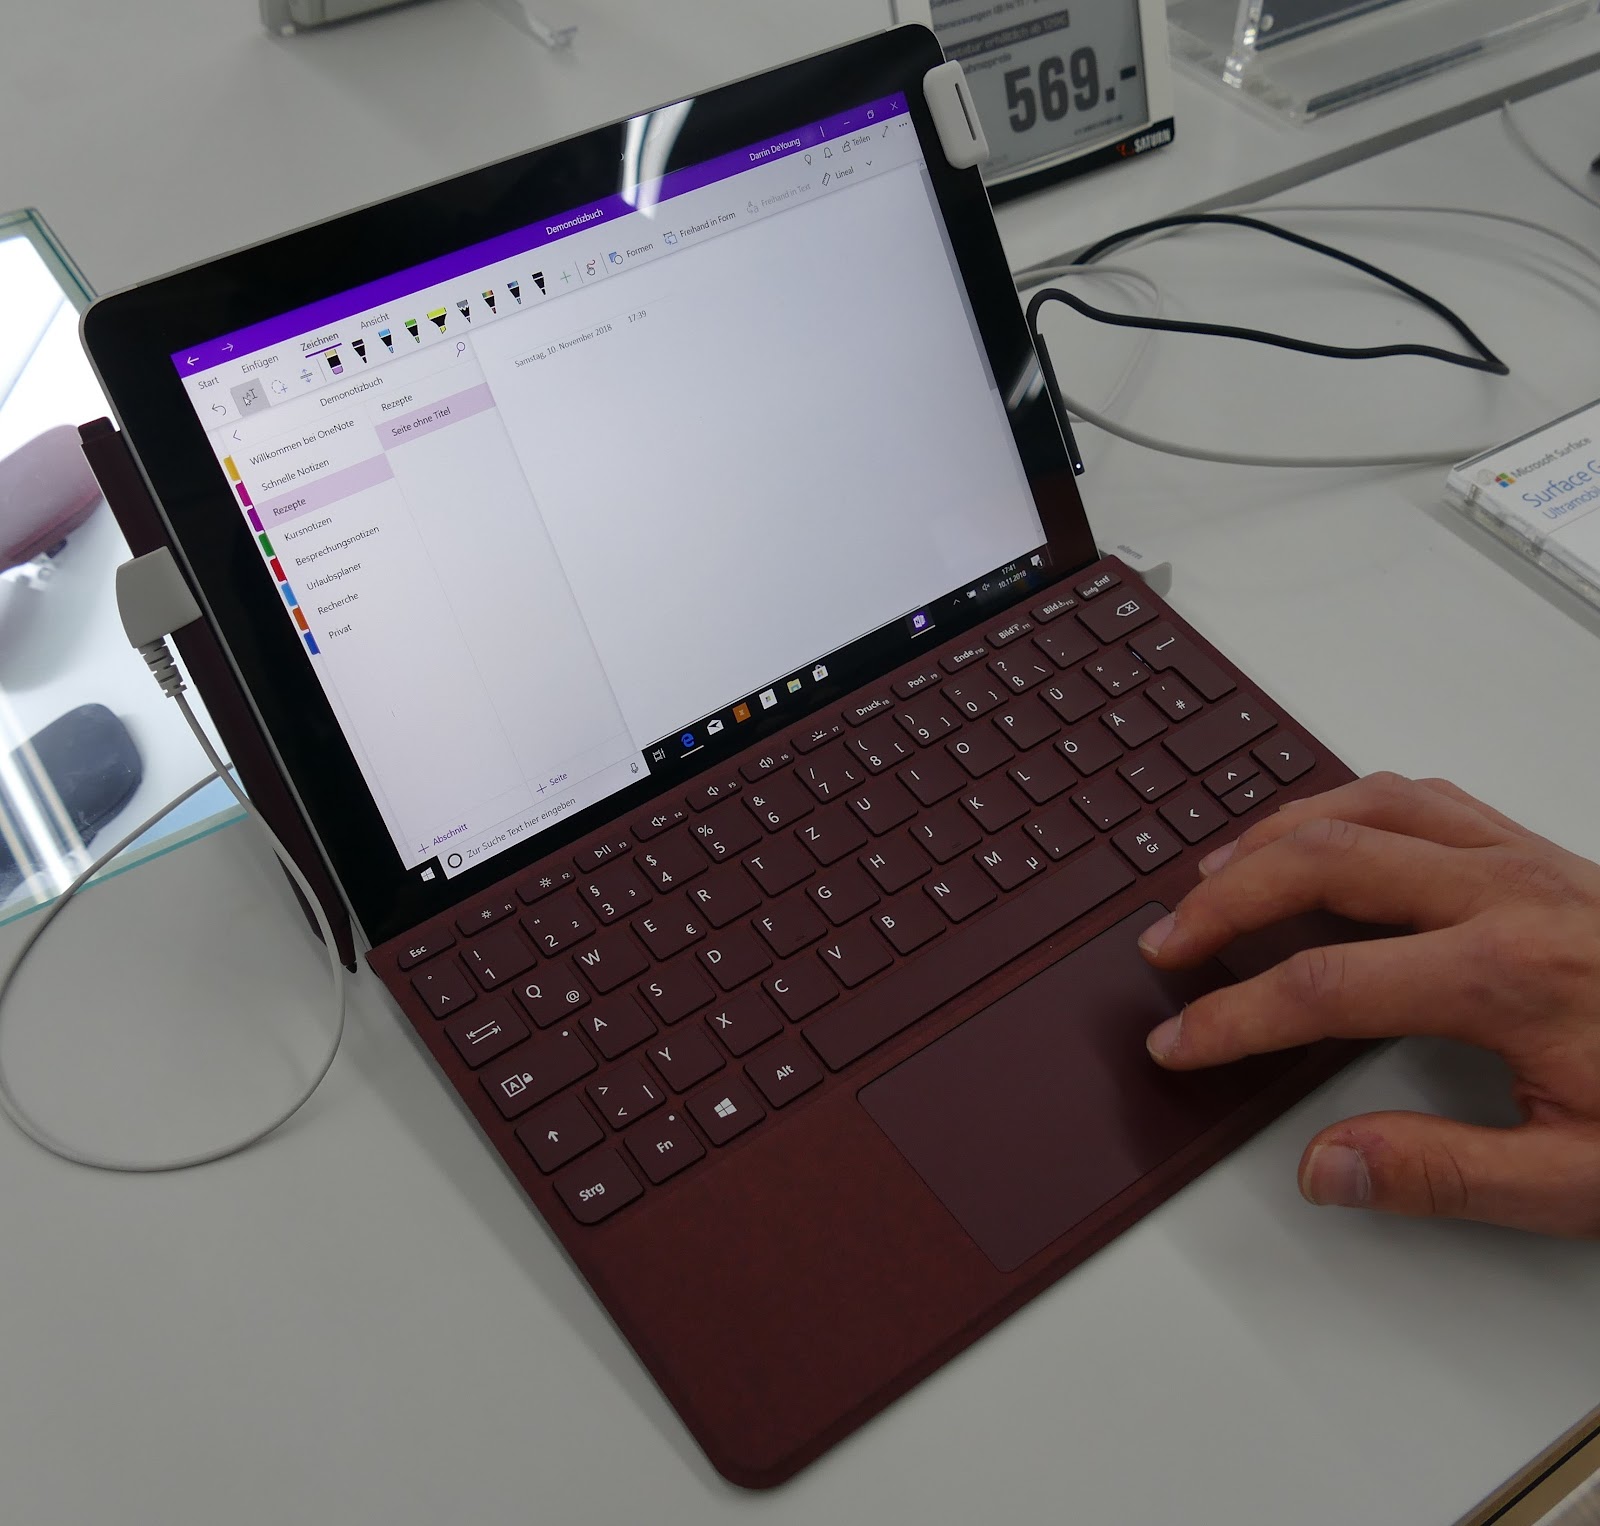 This image shows the laptop with open display in the hands of man in the white table.